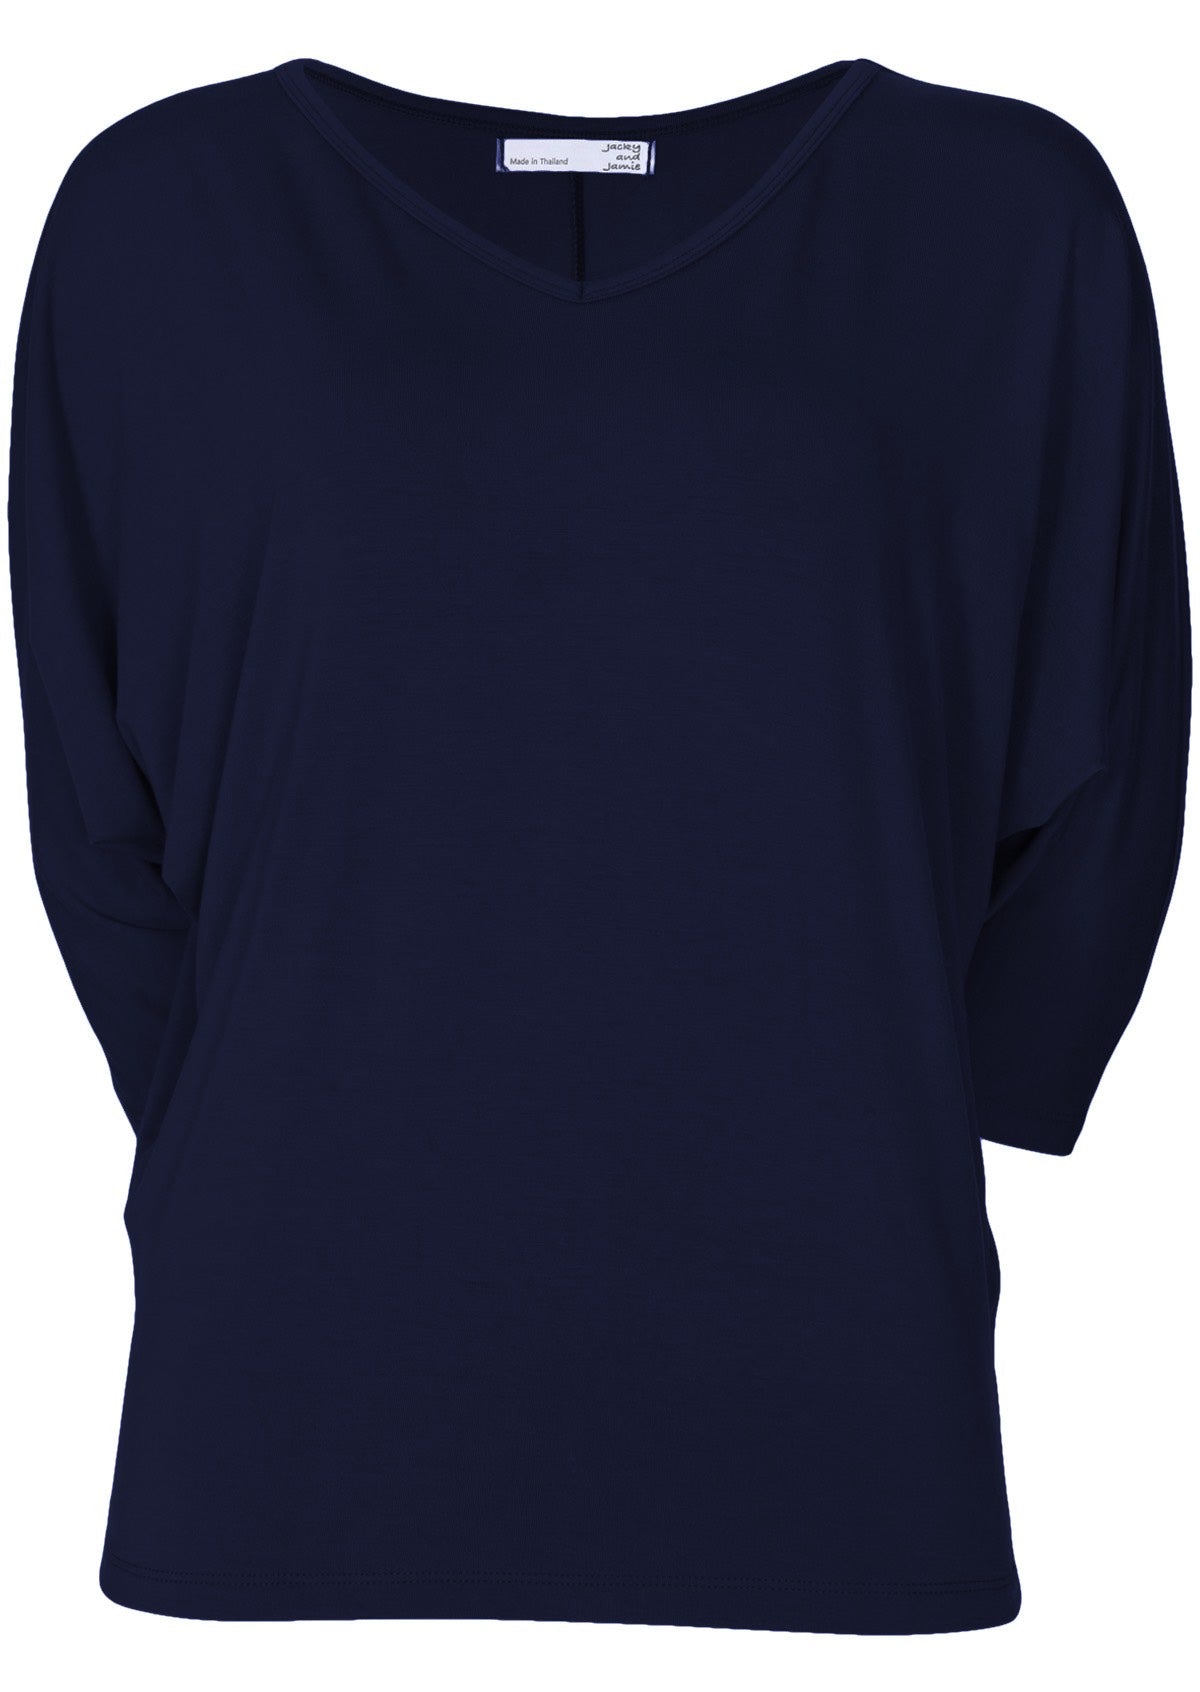 Front view of women's 3/4 sleeve rayon batwing v-neck navy blue top.